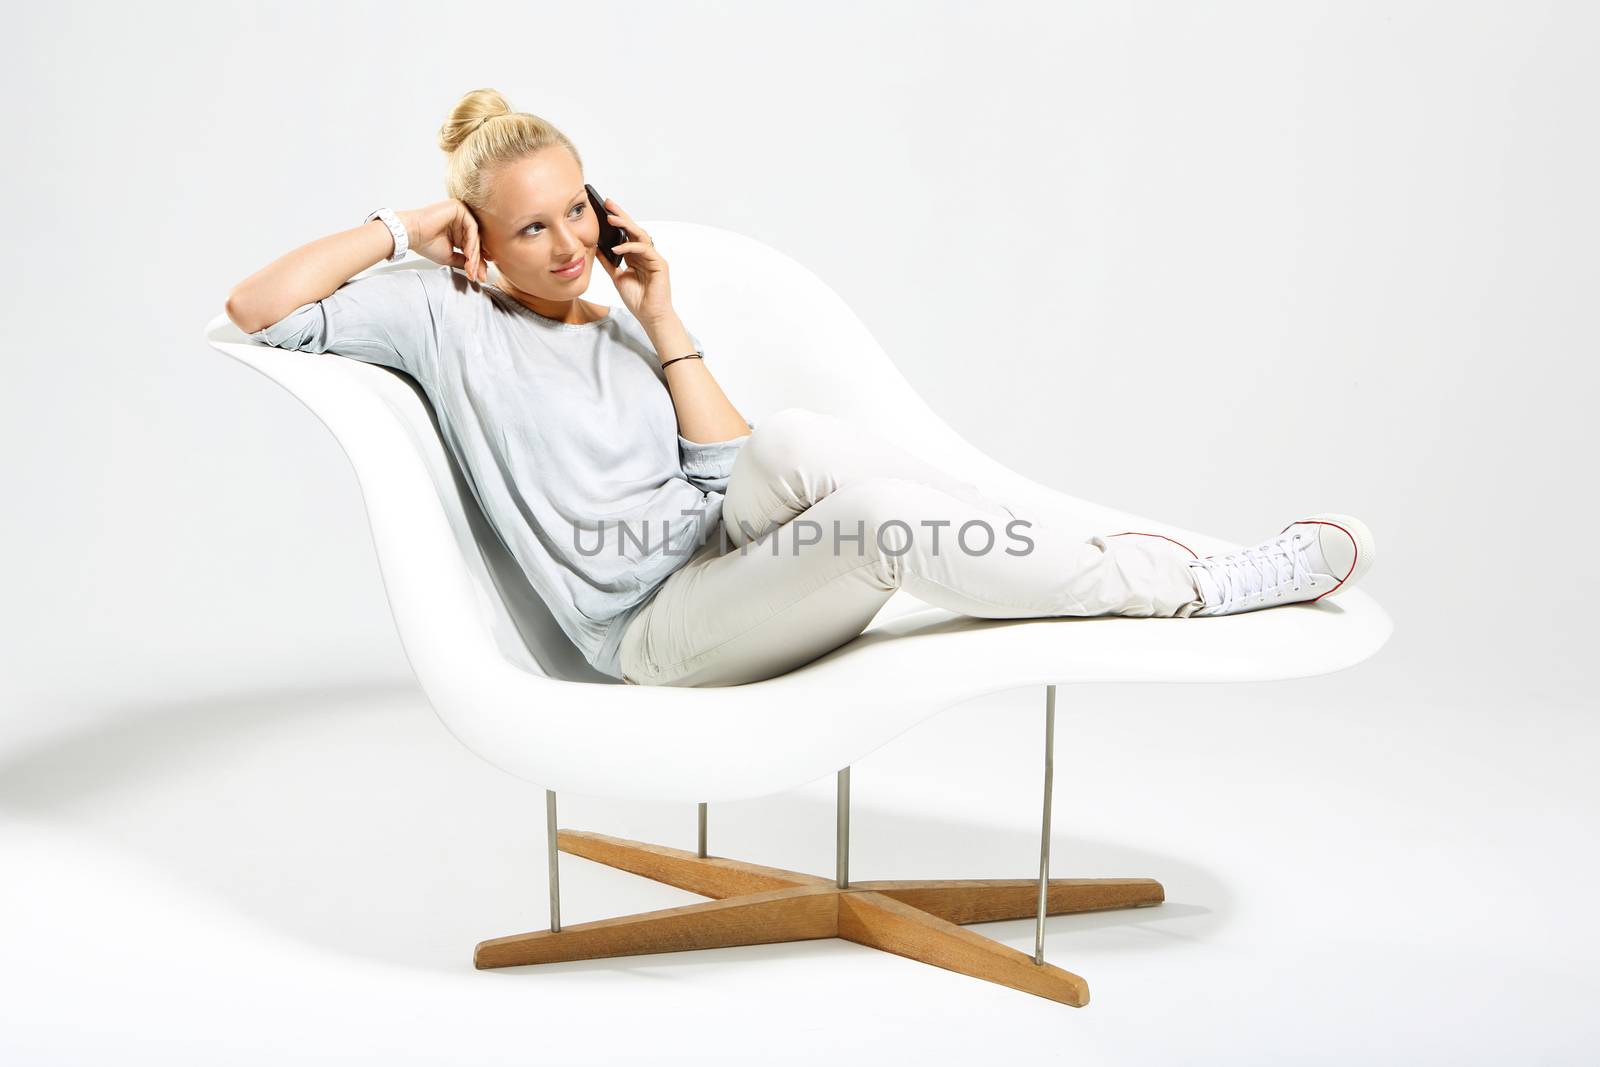 Blonde talking on mobile phone while sitting on a stylish white chair